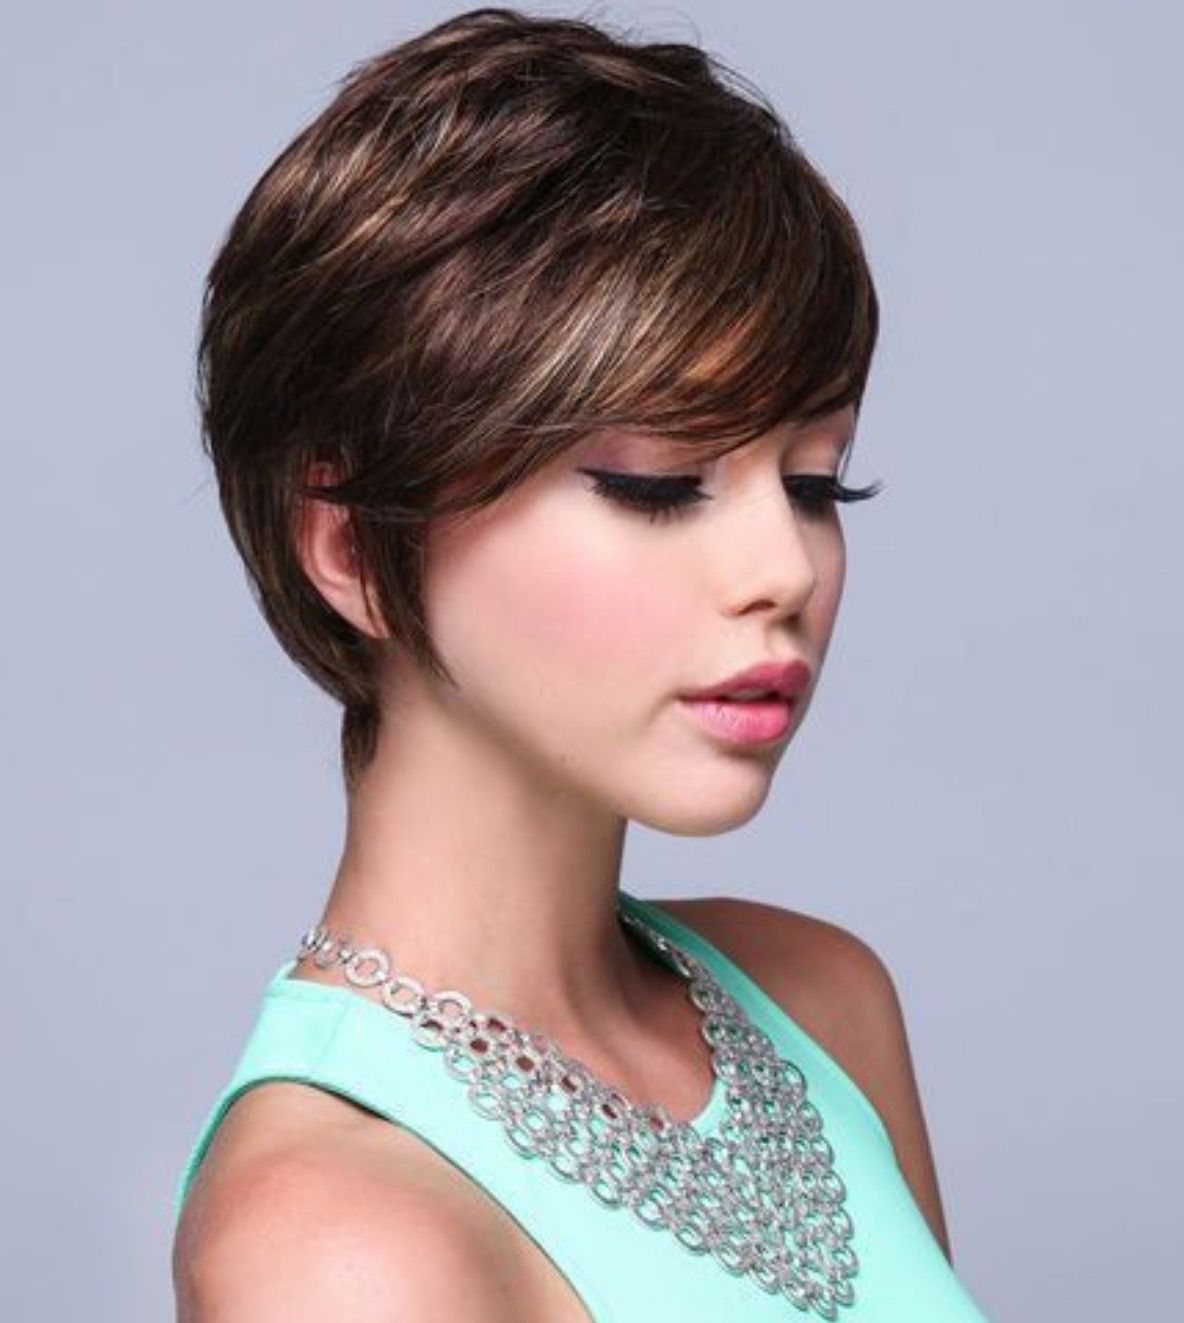 Very Cute Long Pixie Cut | Things That Catch My Eye | Pinterest With Regard To 2018 Medium Short Pixie Hairstyles (Photo 12 of 15)